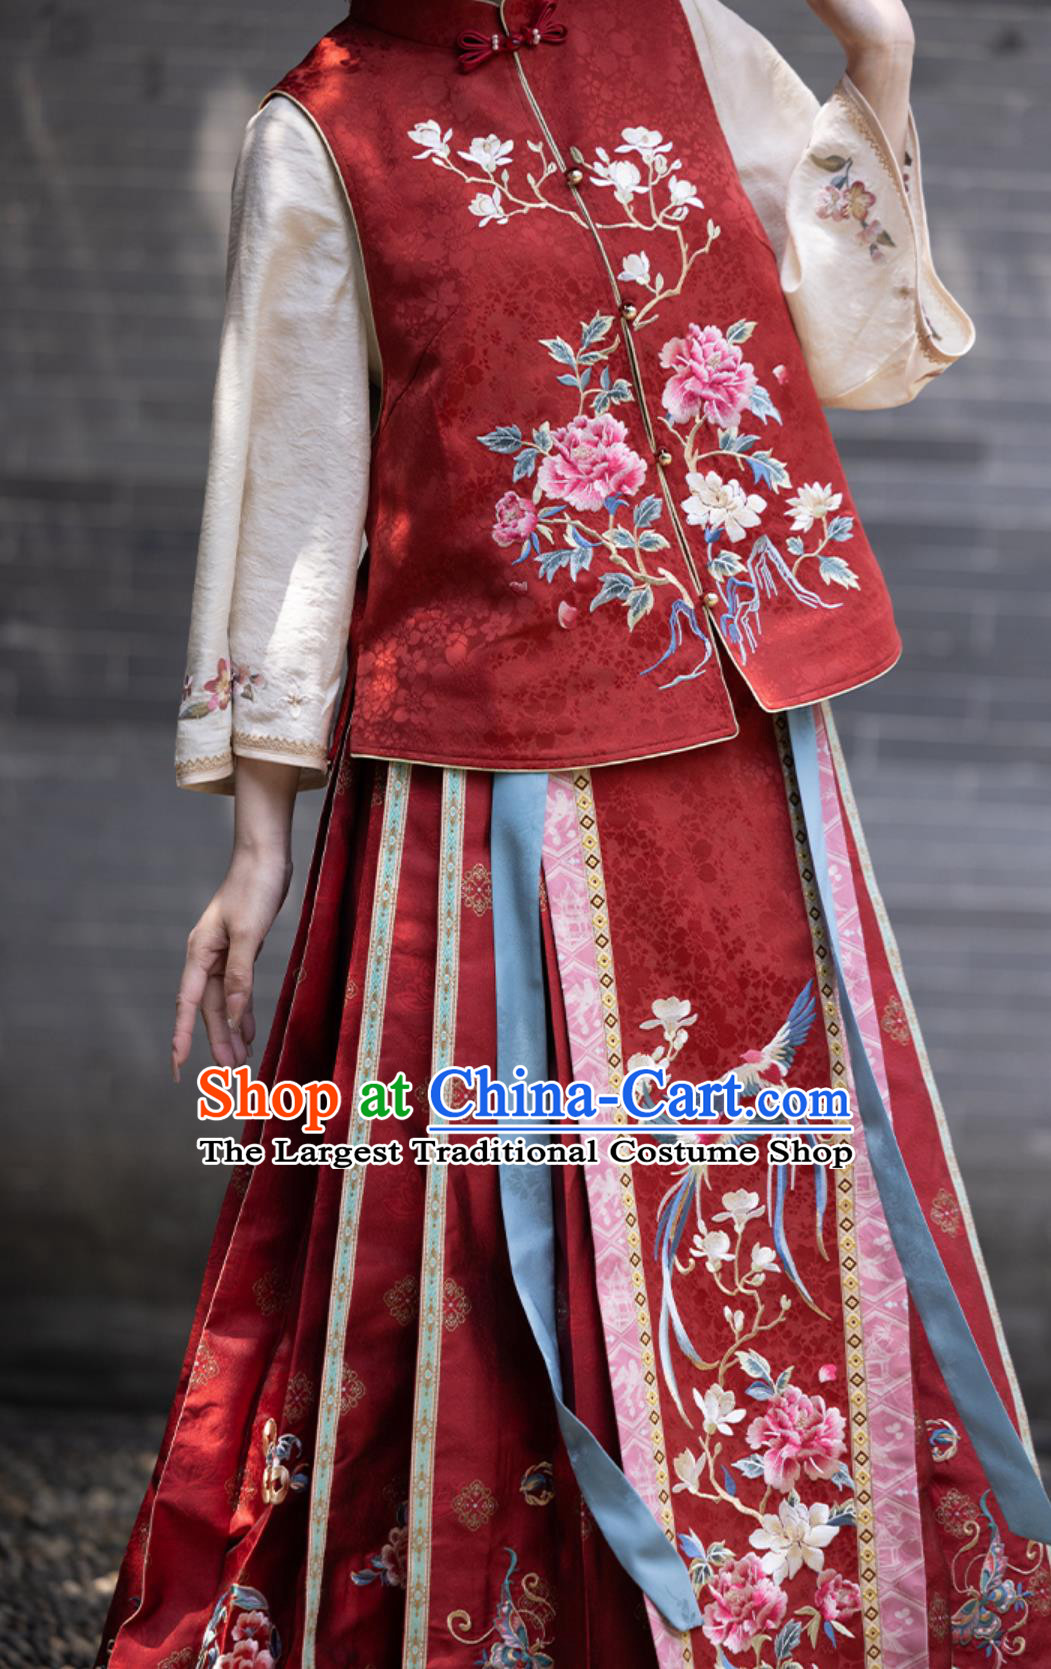 China Traditional Wedding Costume Ancient Chinese Clothing Minguo Bride Attire